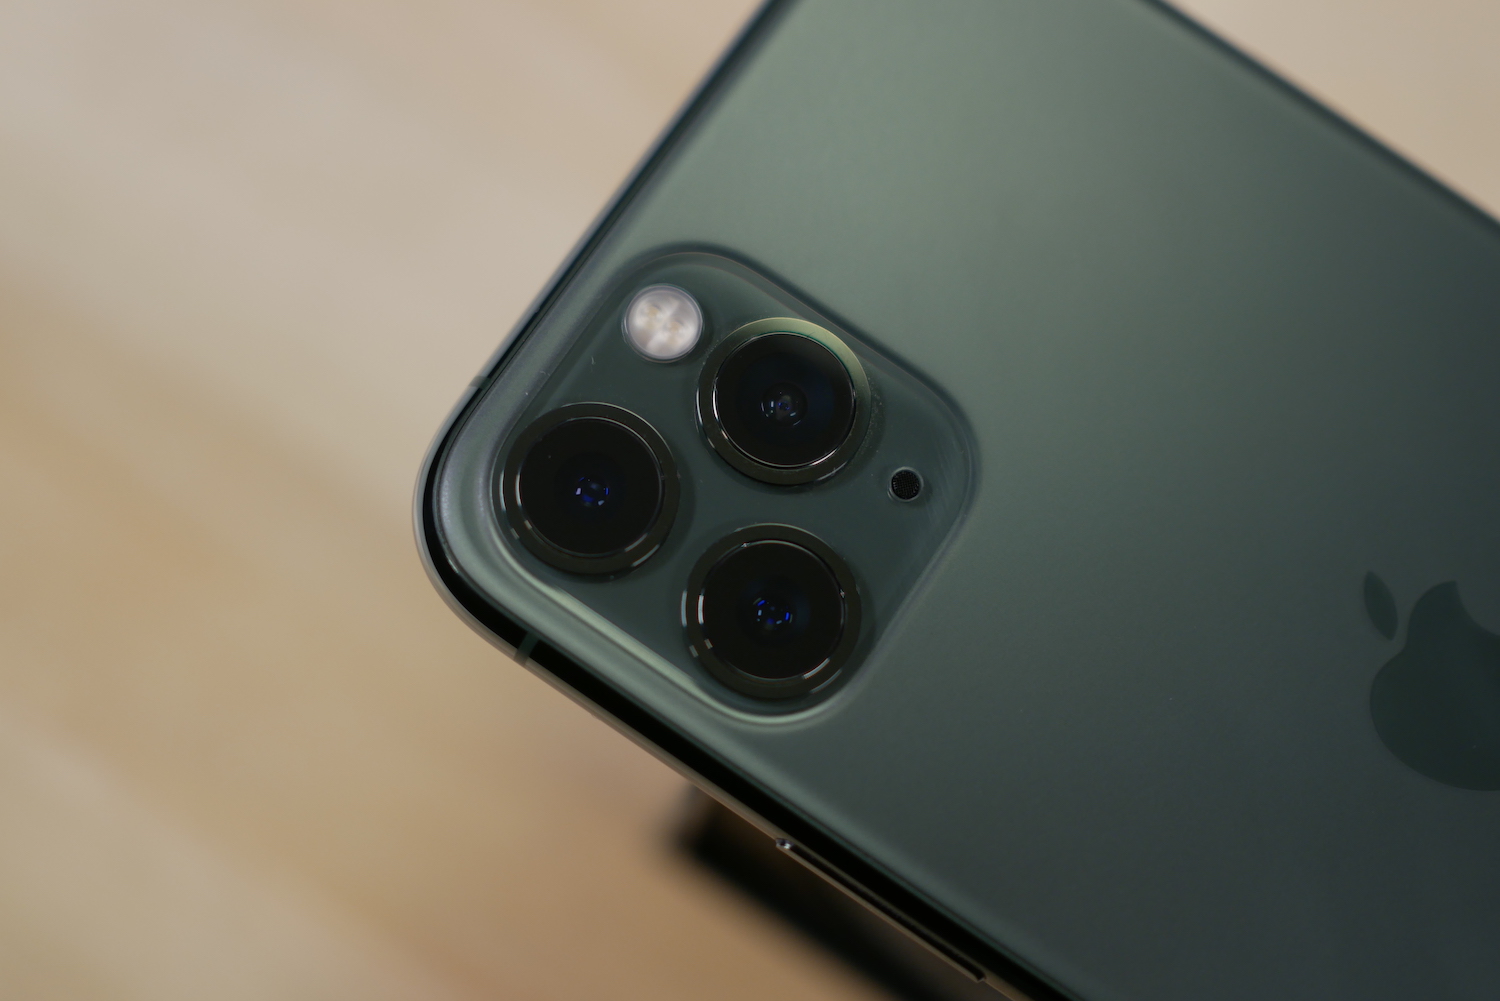 Apple iPhone 11 Pro Cameras Are Worth the Price of Admission: REVIEW